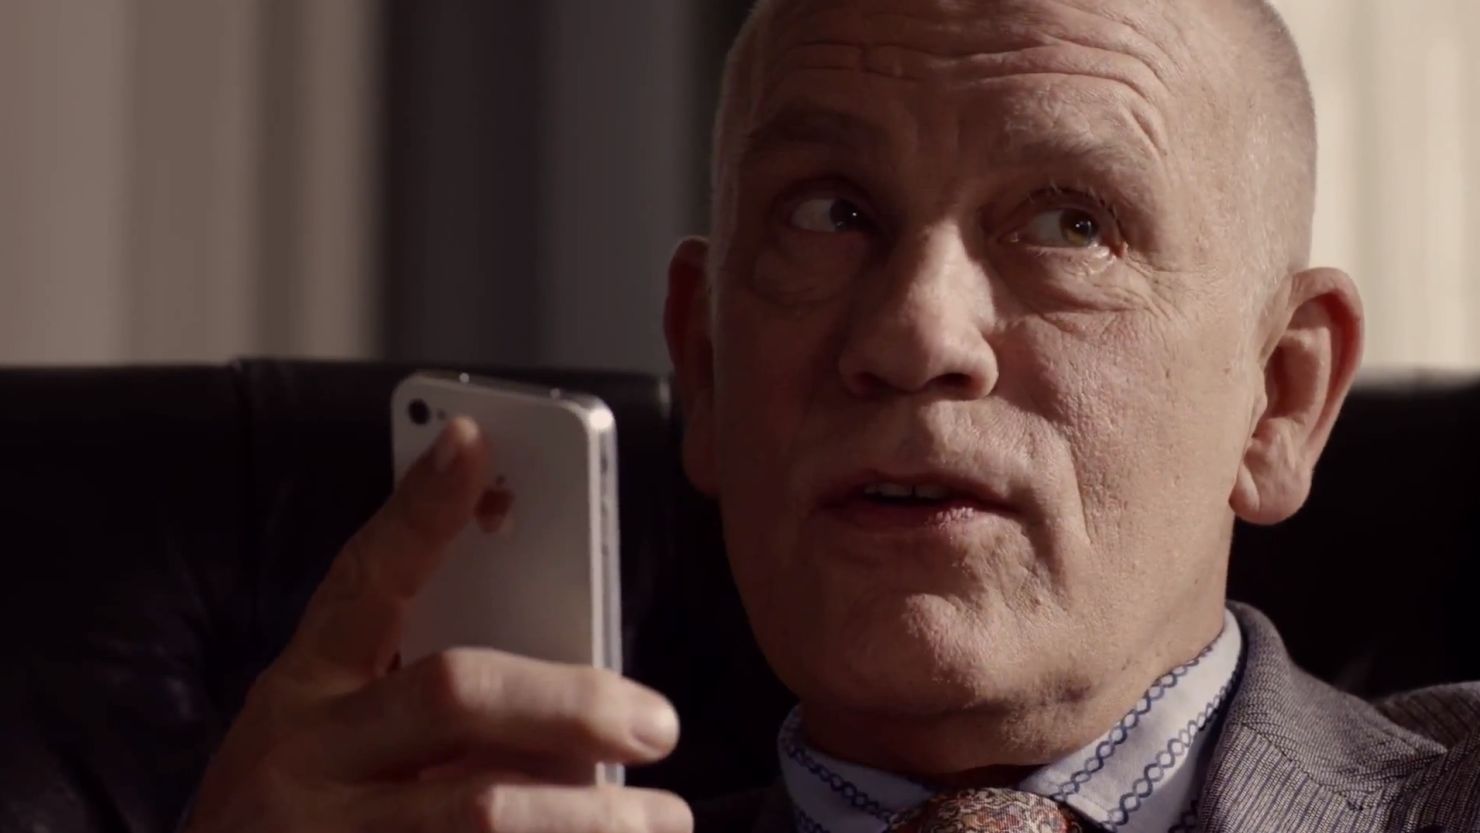 Actor John Malkovich talks to his iPhone 4S in a current TV ad for Apple.